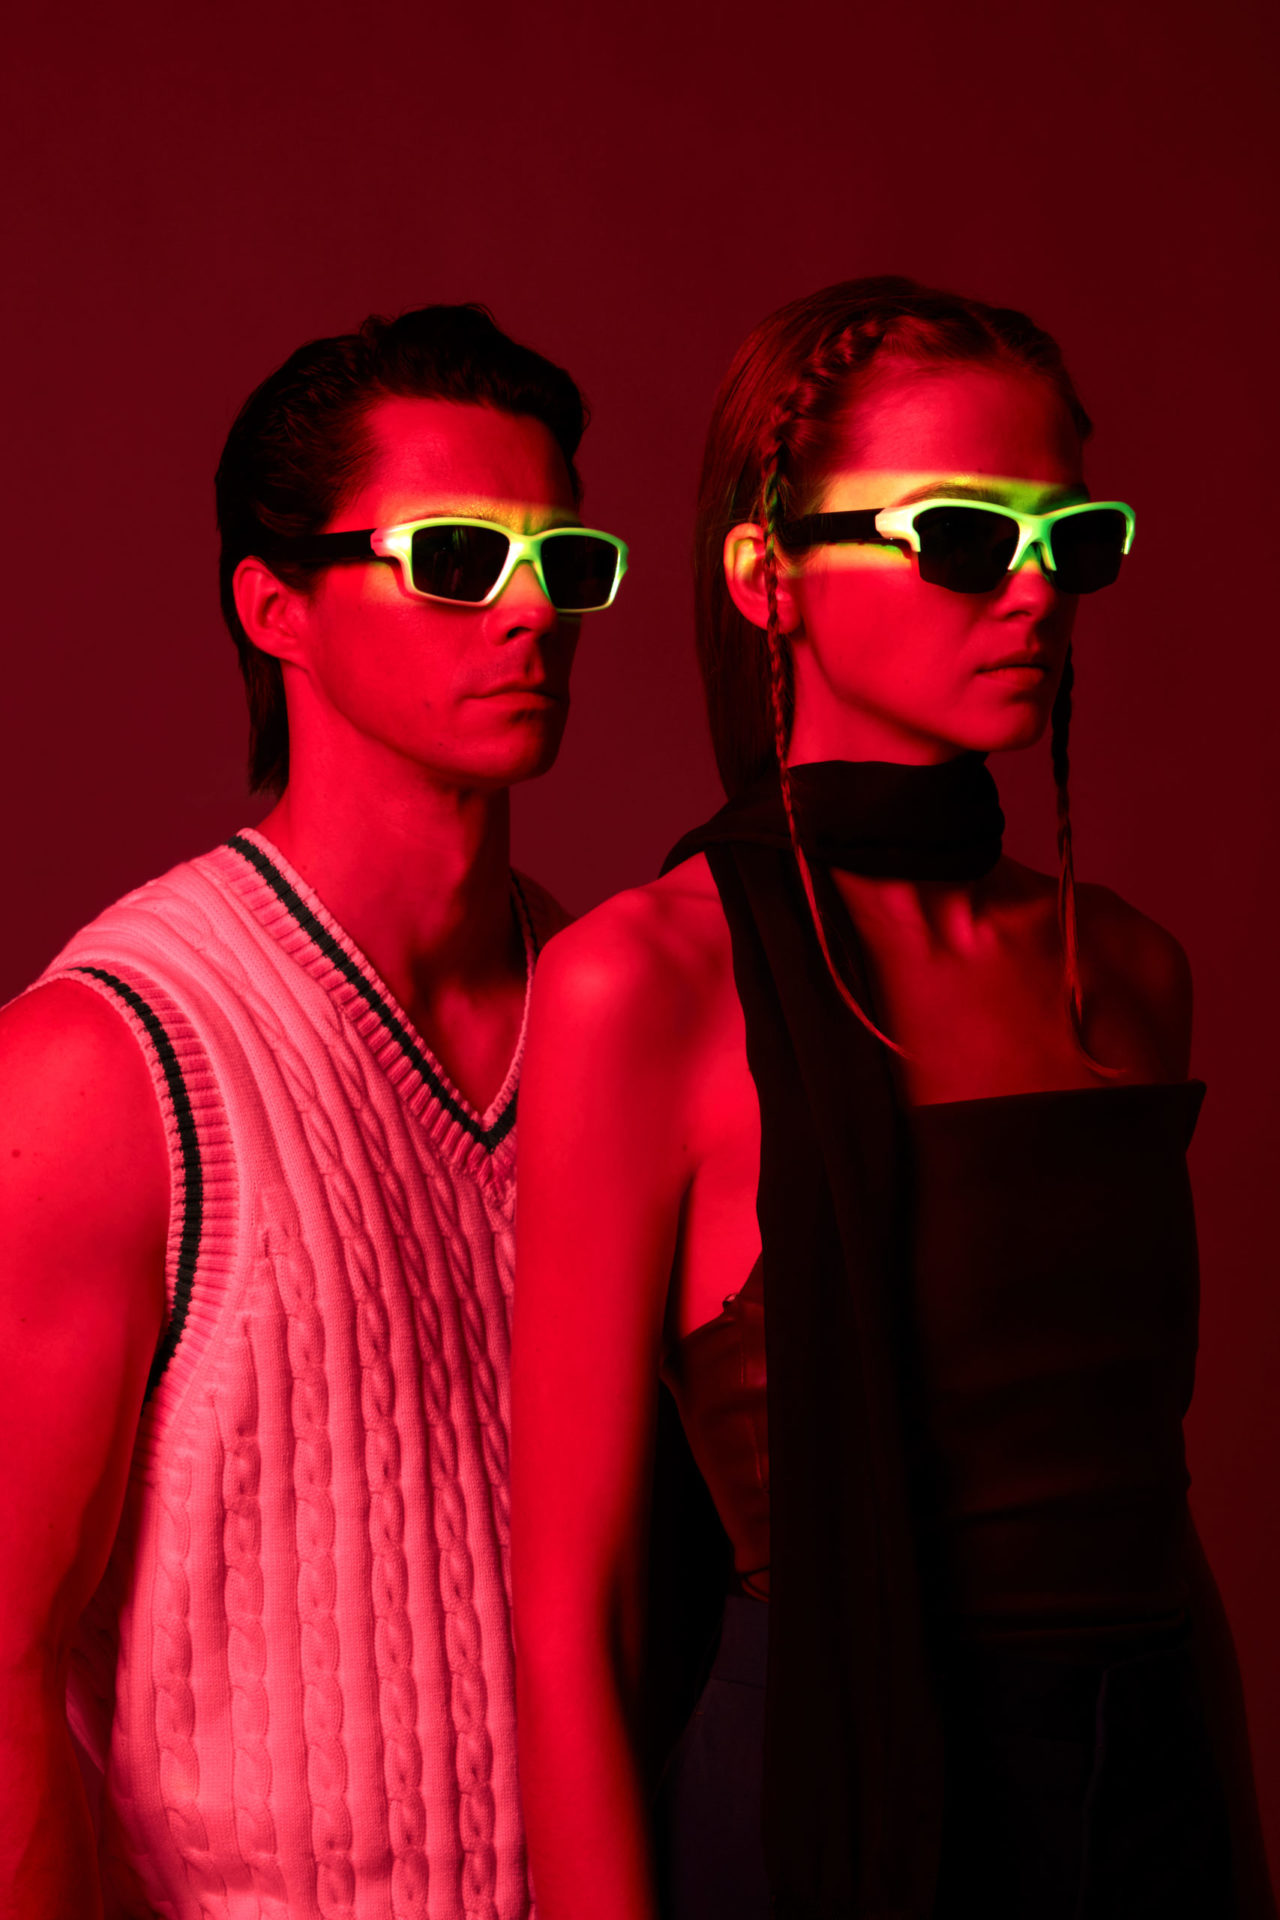 A man and a woman wearing sunglasses, with the man and women both looking into the distance. The background features a red color with a neon green lighting effect on the sunglasses part to highlight the product. This creative promotional shoot was captured by I Heart Studios.